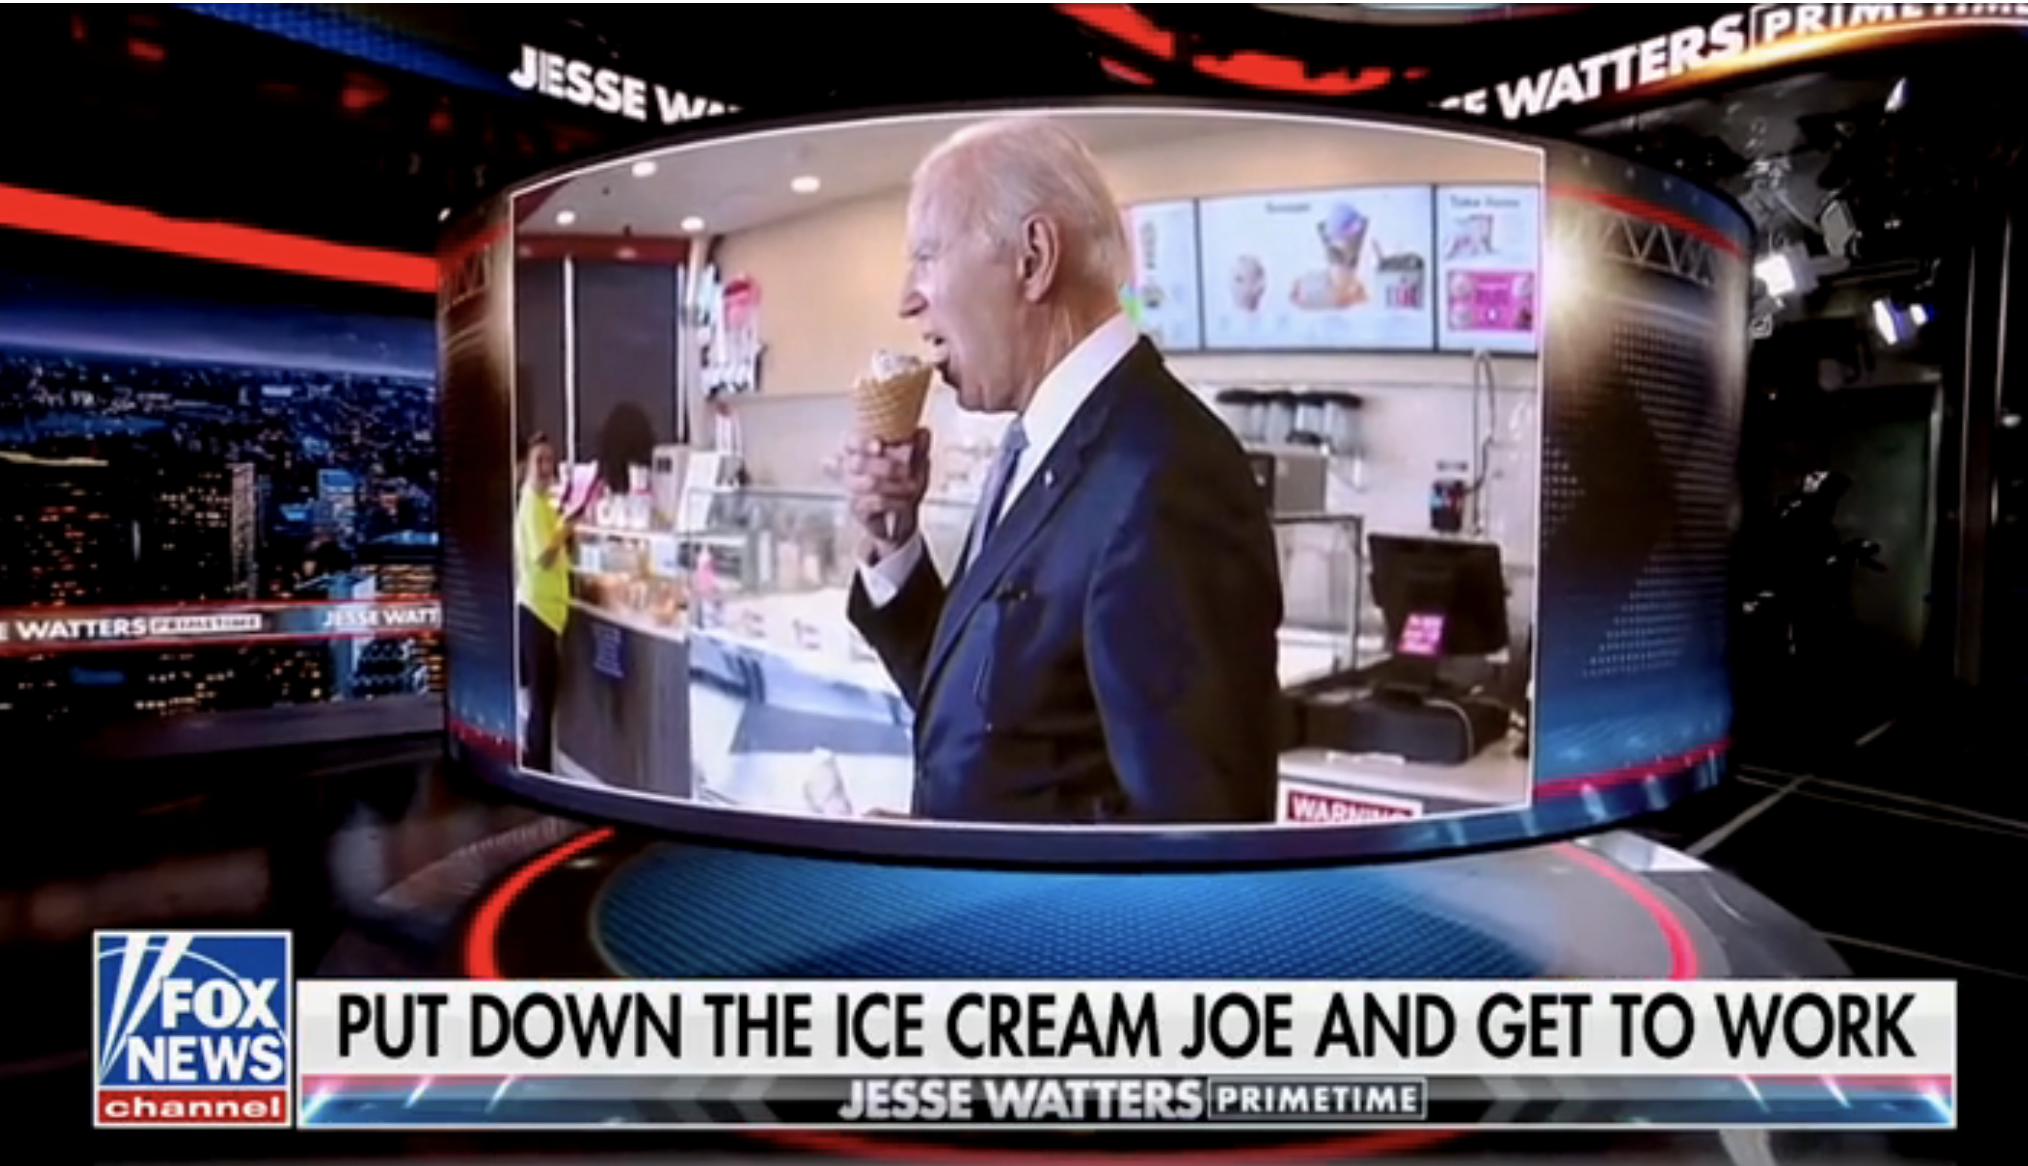 &quot;Put down the ice cream Joe and get to work&quot;